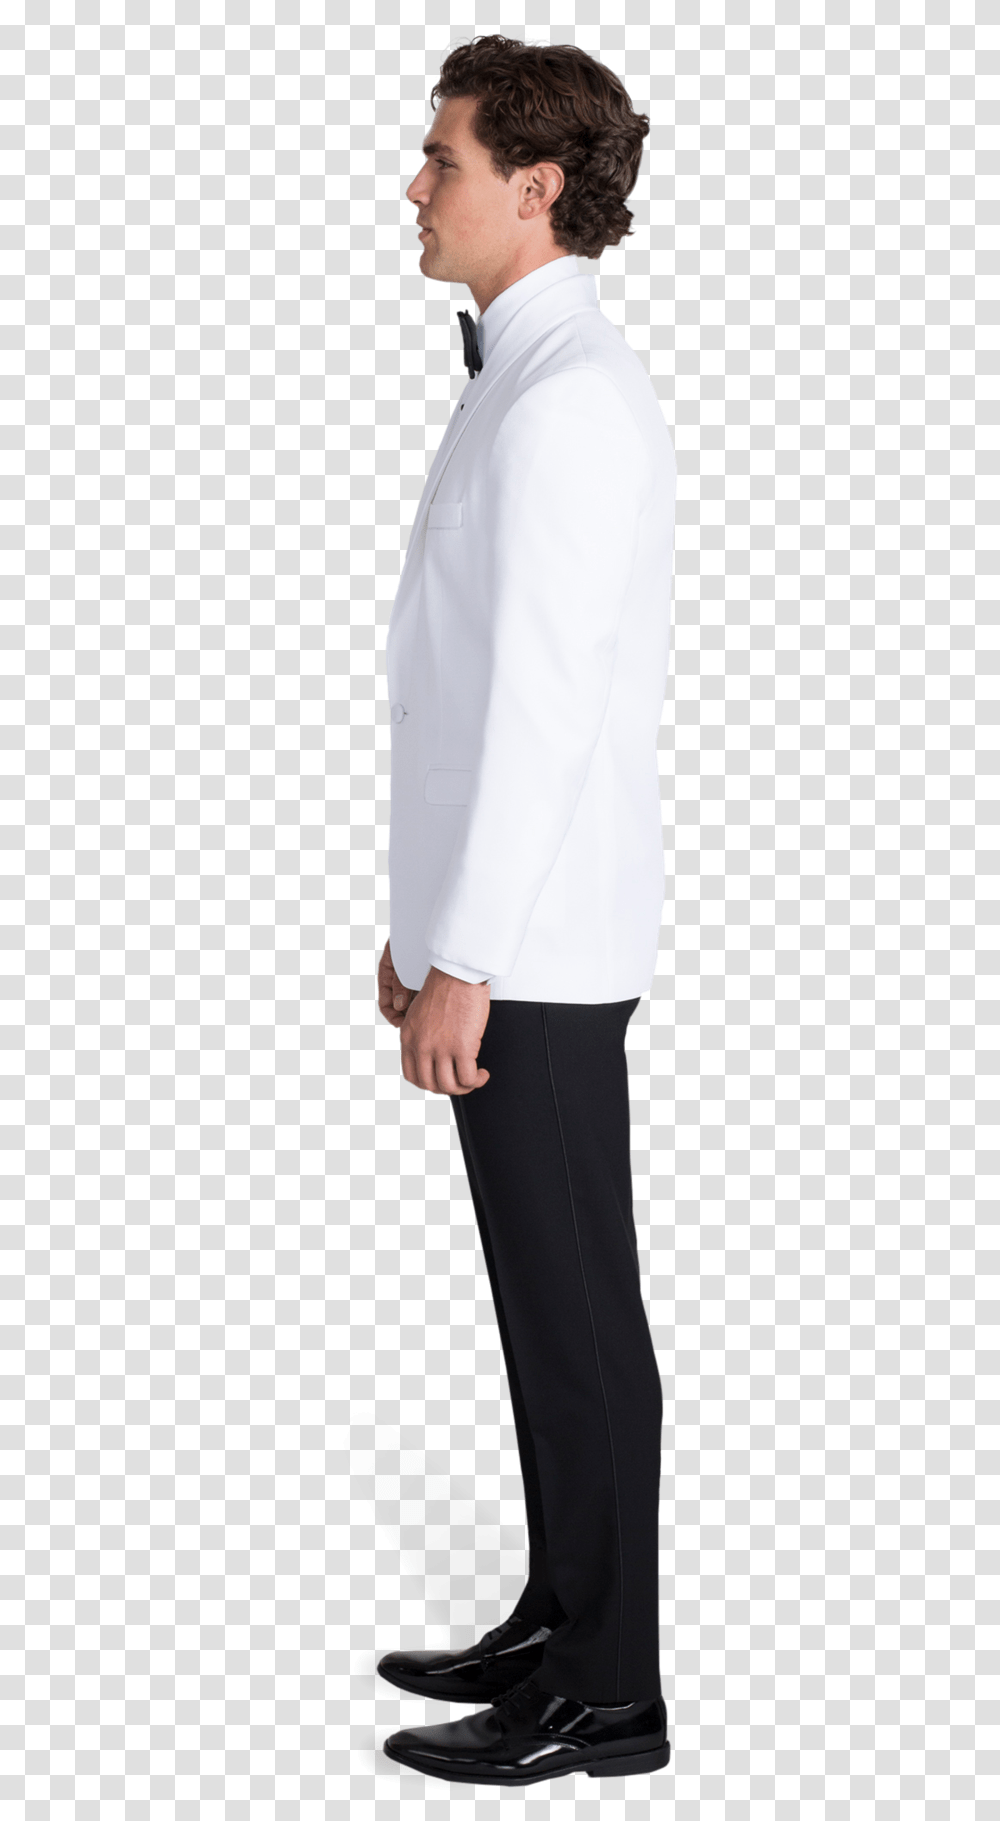 Mens White Tuxedo Jacket Slim Fit Tuxedo From The Side, Shirt, Person, Dress Shirt Transparent Png